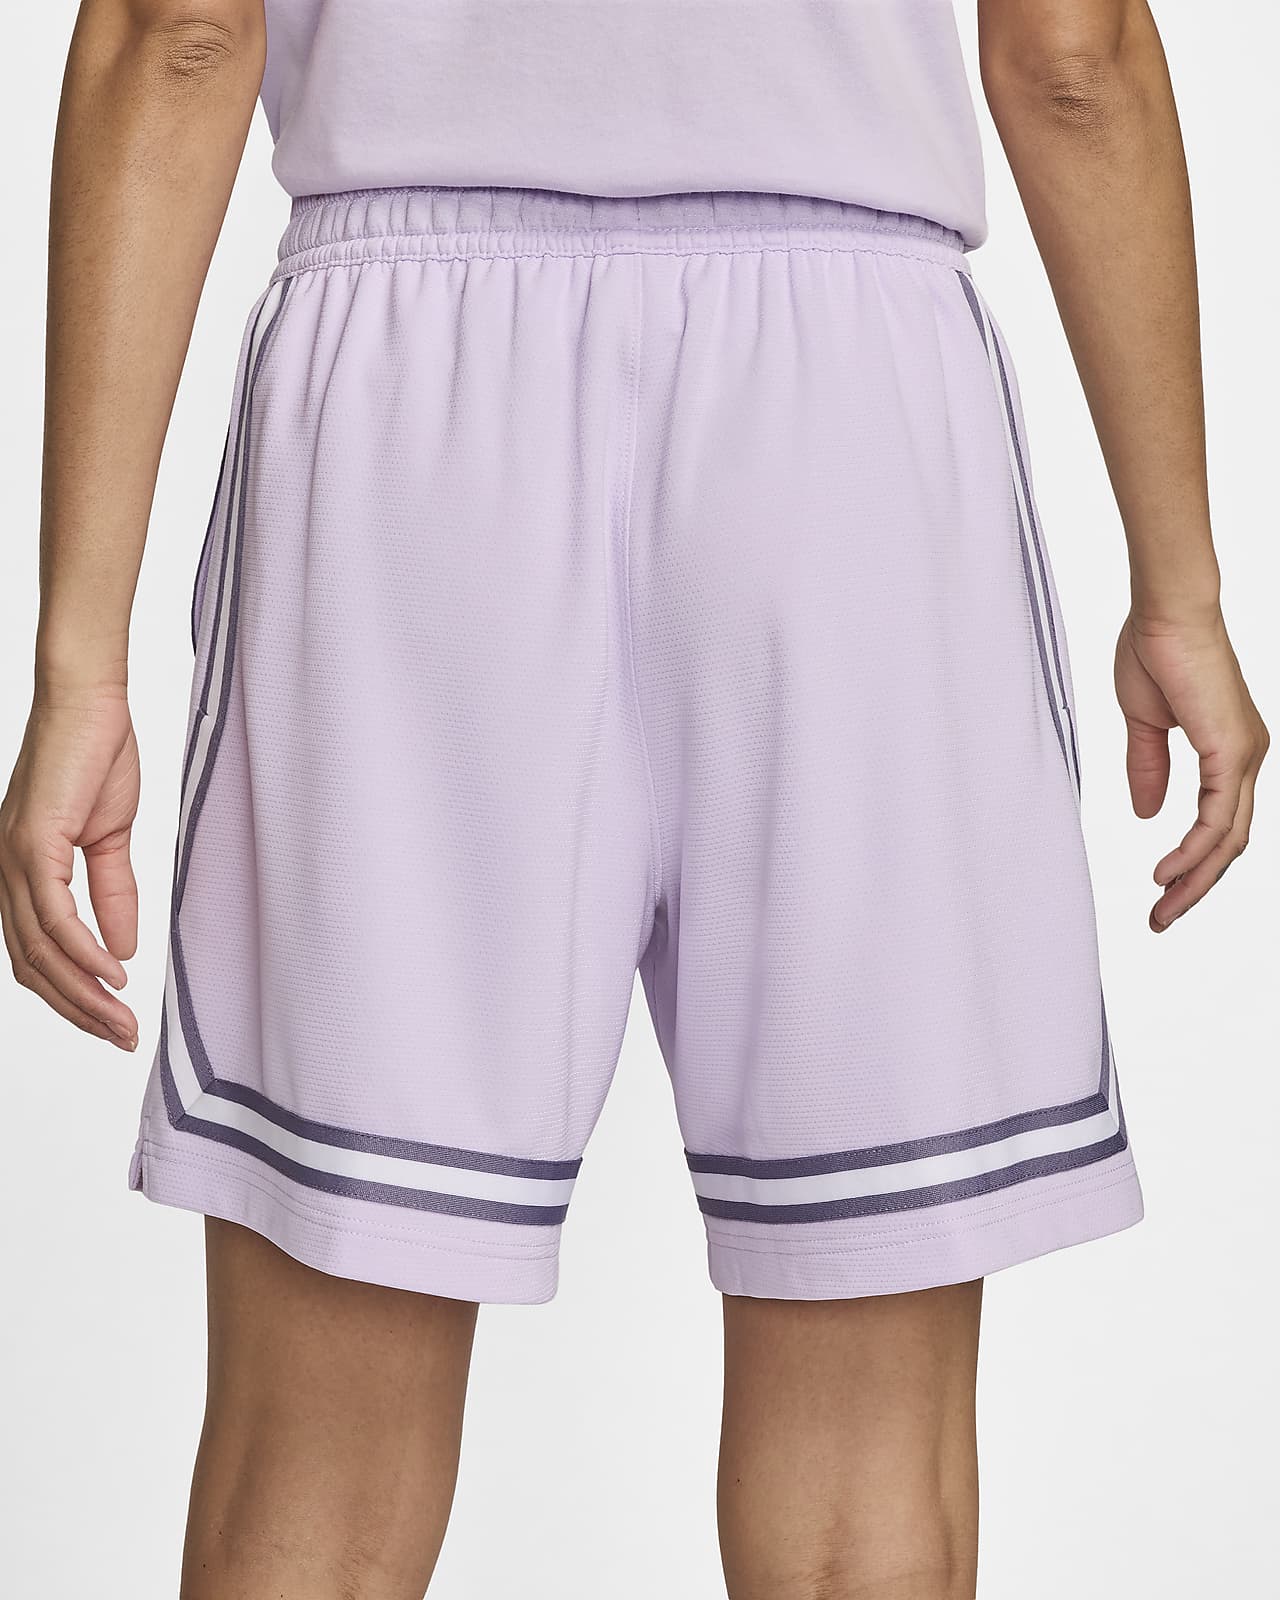 Nike Women's Basketball Fly Crossover Shorts